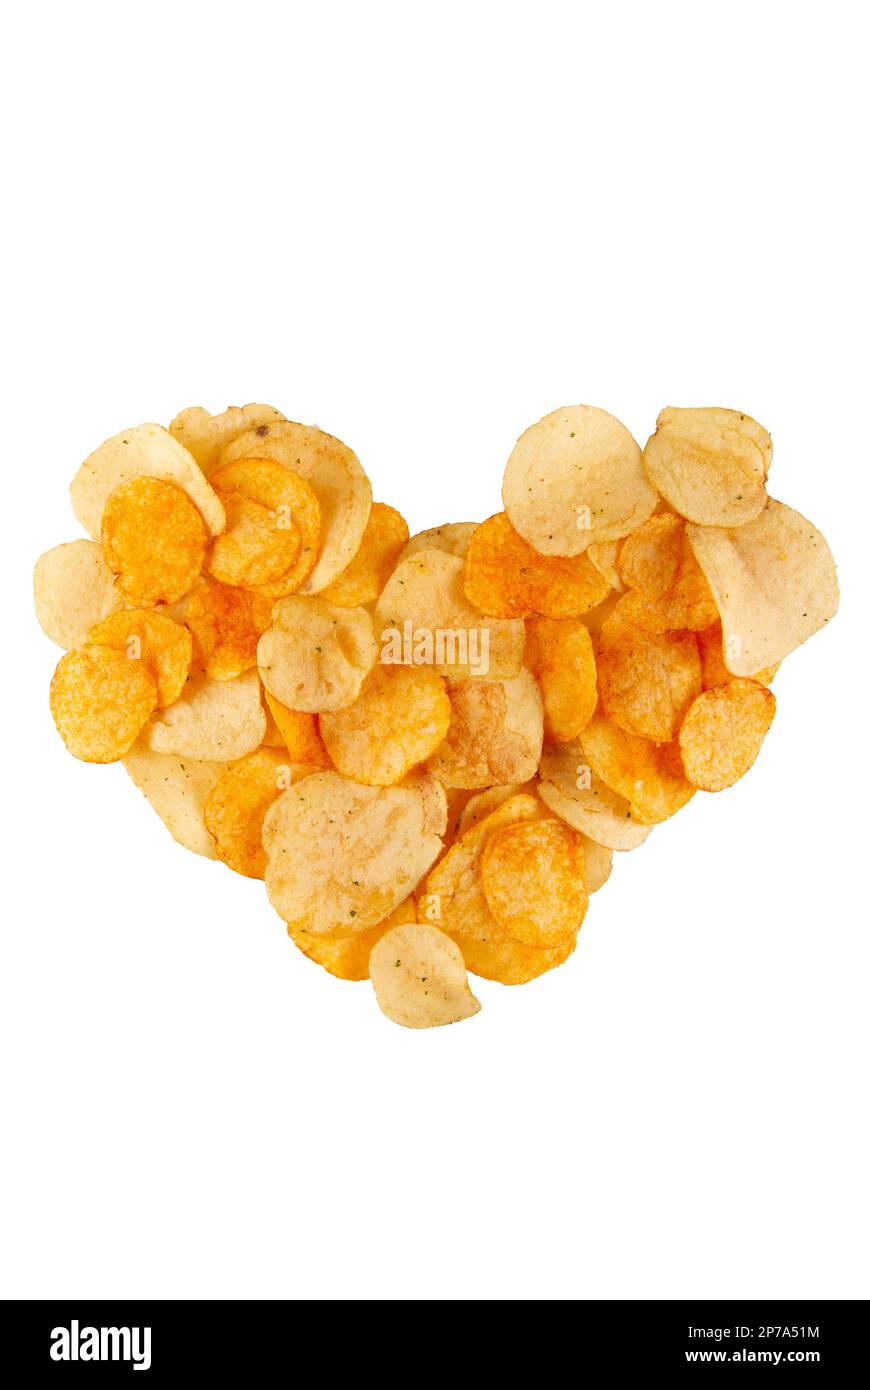 Potato chips in the shape of heart isolated on white background. Hearty snack with a satisfying crunch Stock Photo